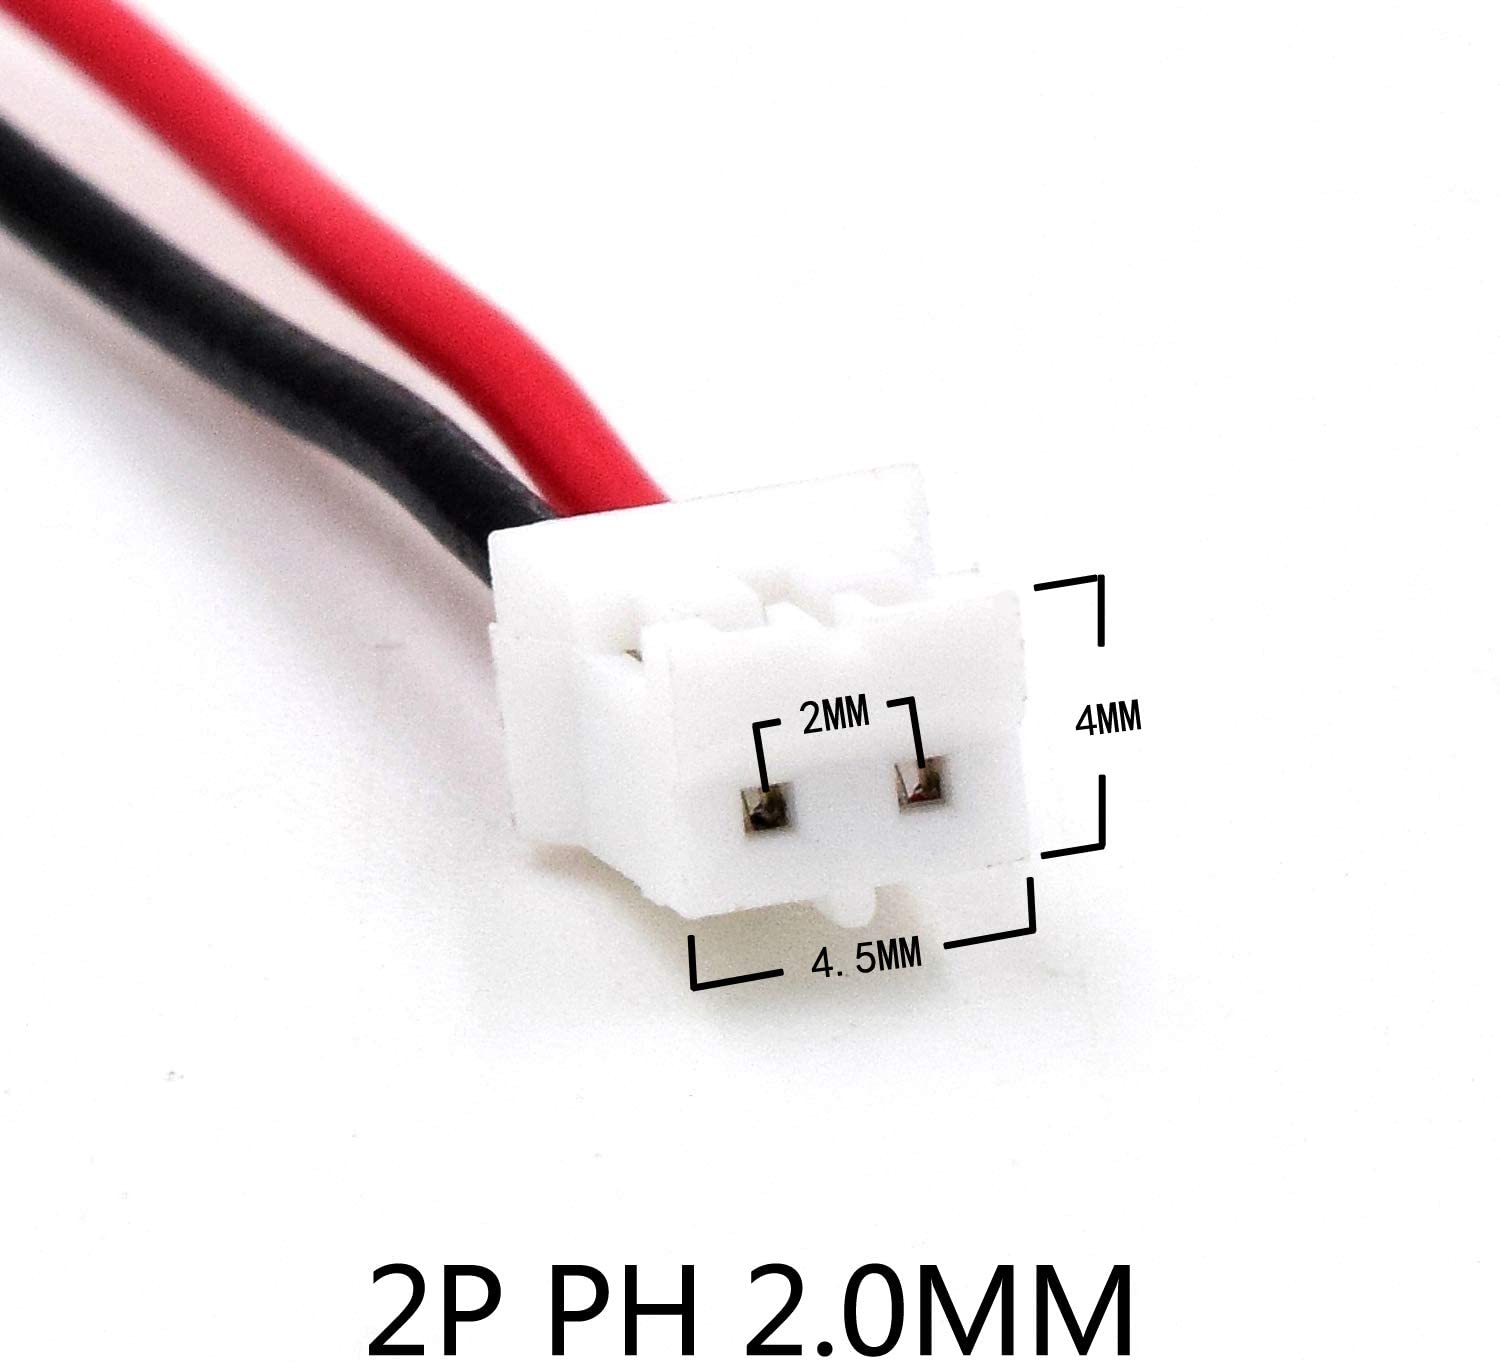 3.7V 160mAh 451430 Rechargeable Lithium Polymer Battery